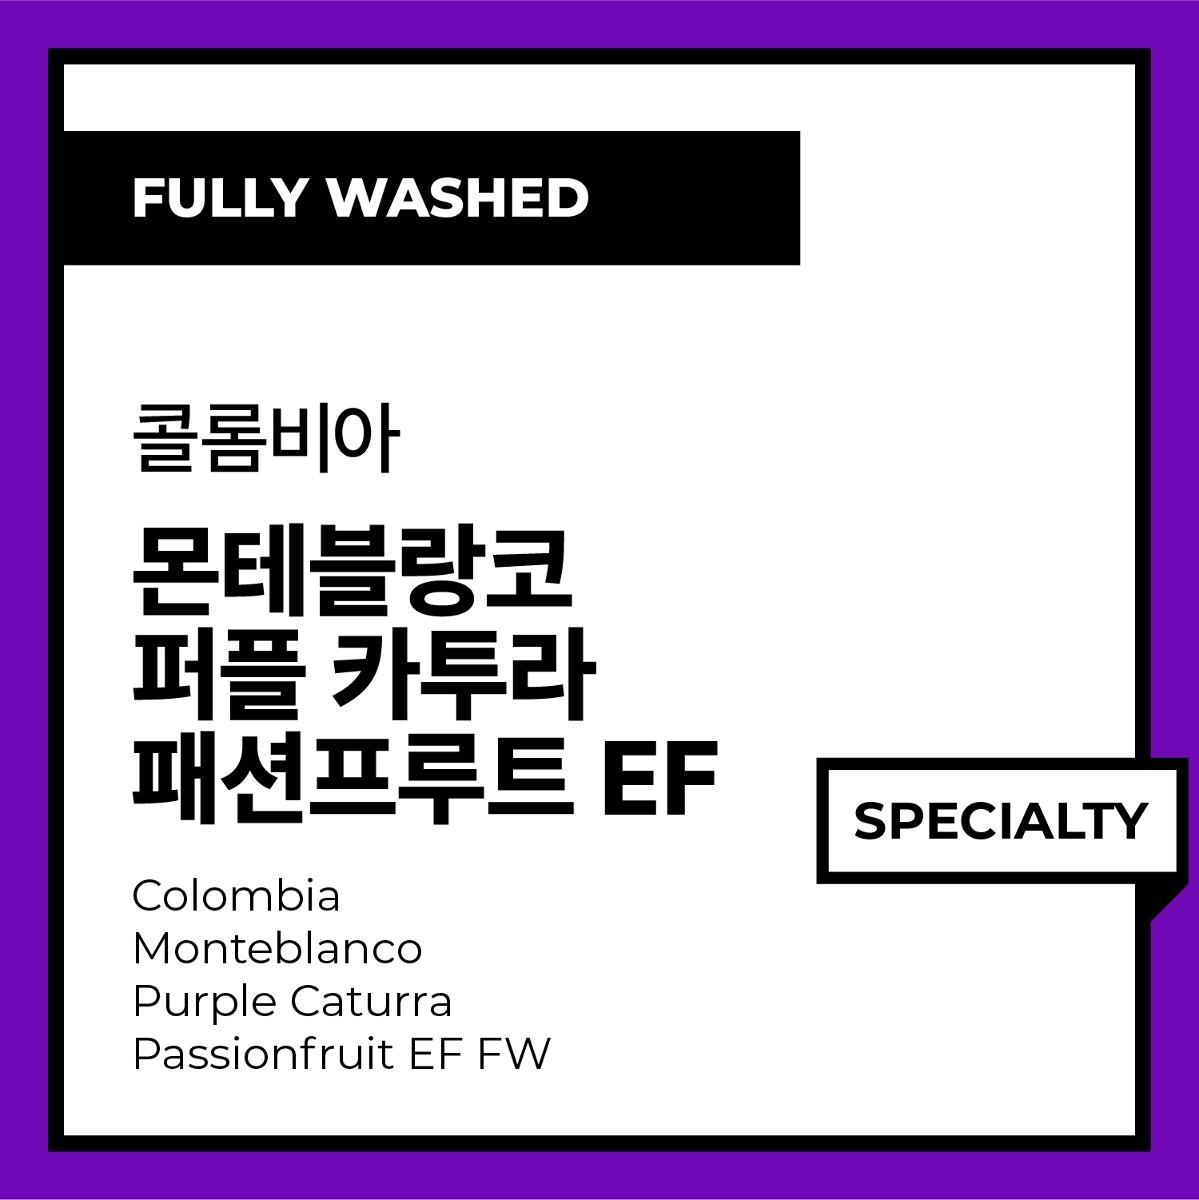 Colombia Monteblanco Purple Caturra Passionfruit EF (Fully Washed) 콜롬비아 몬테블랑코 퍼플 카투라 패션프루트 EF (풀리 워시드)